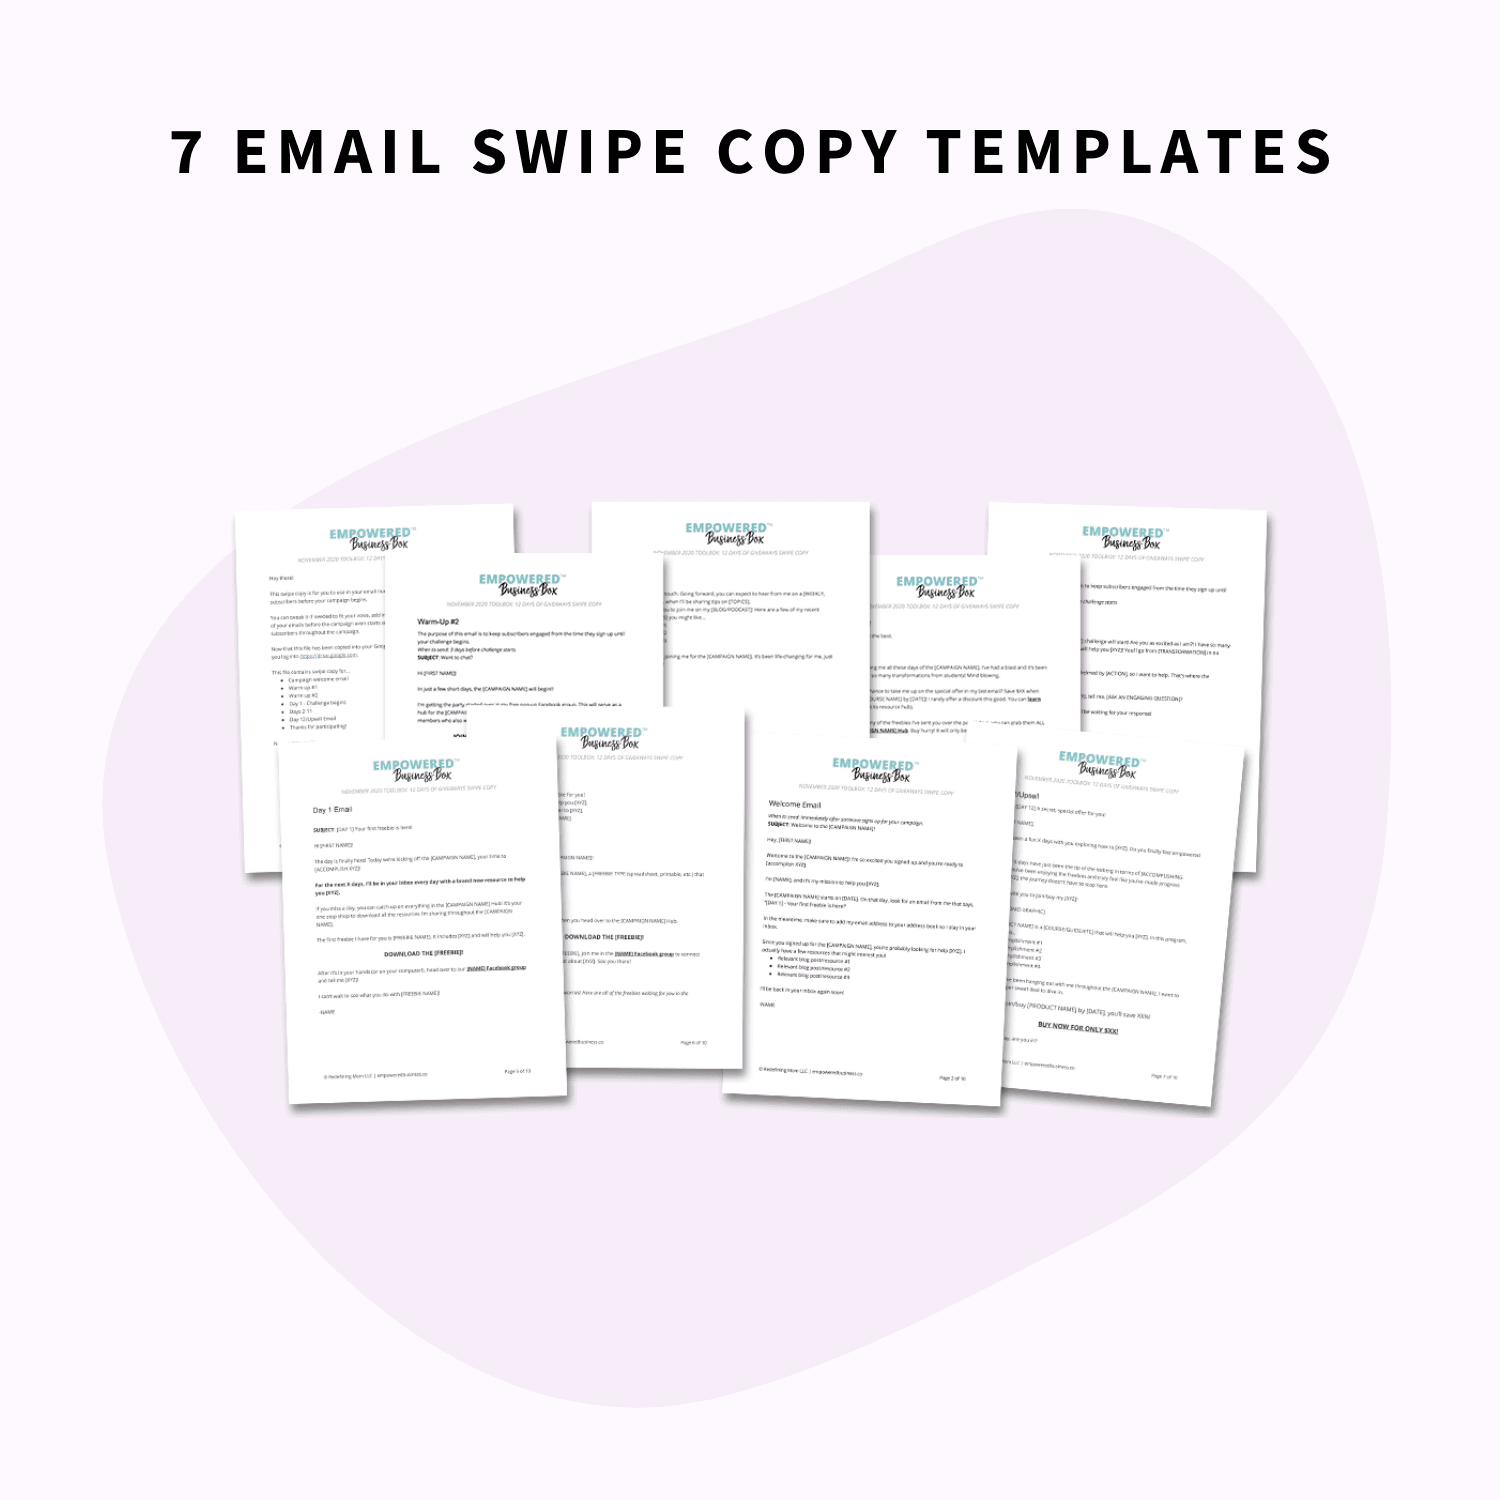 12 Days of Giveaways toolbox email swipe copy templates